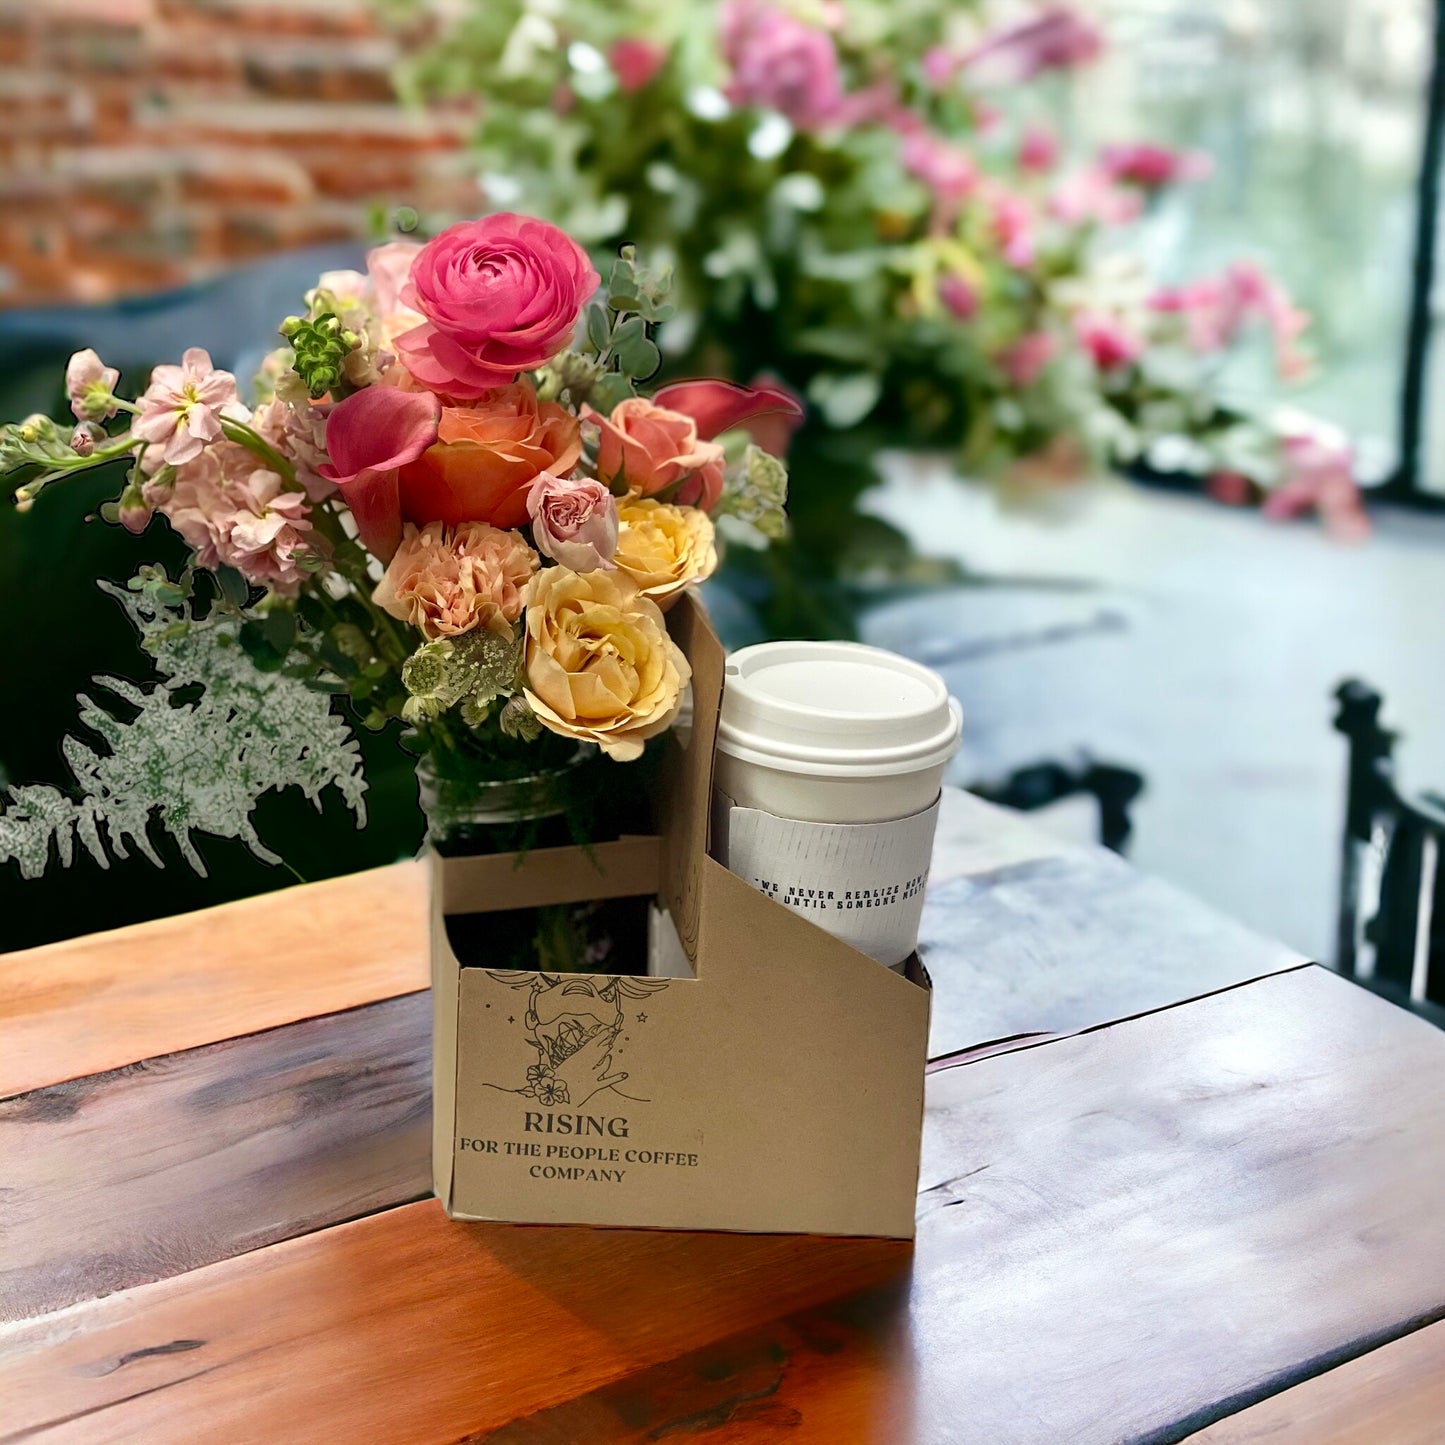 Rising for people coffee & flower delivery. For Valentine’s Day in collaboration with galena forest flowers. Located in Reno Nevada. Best for specialty, organic,coffee